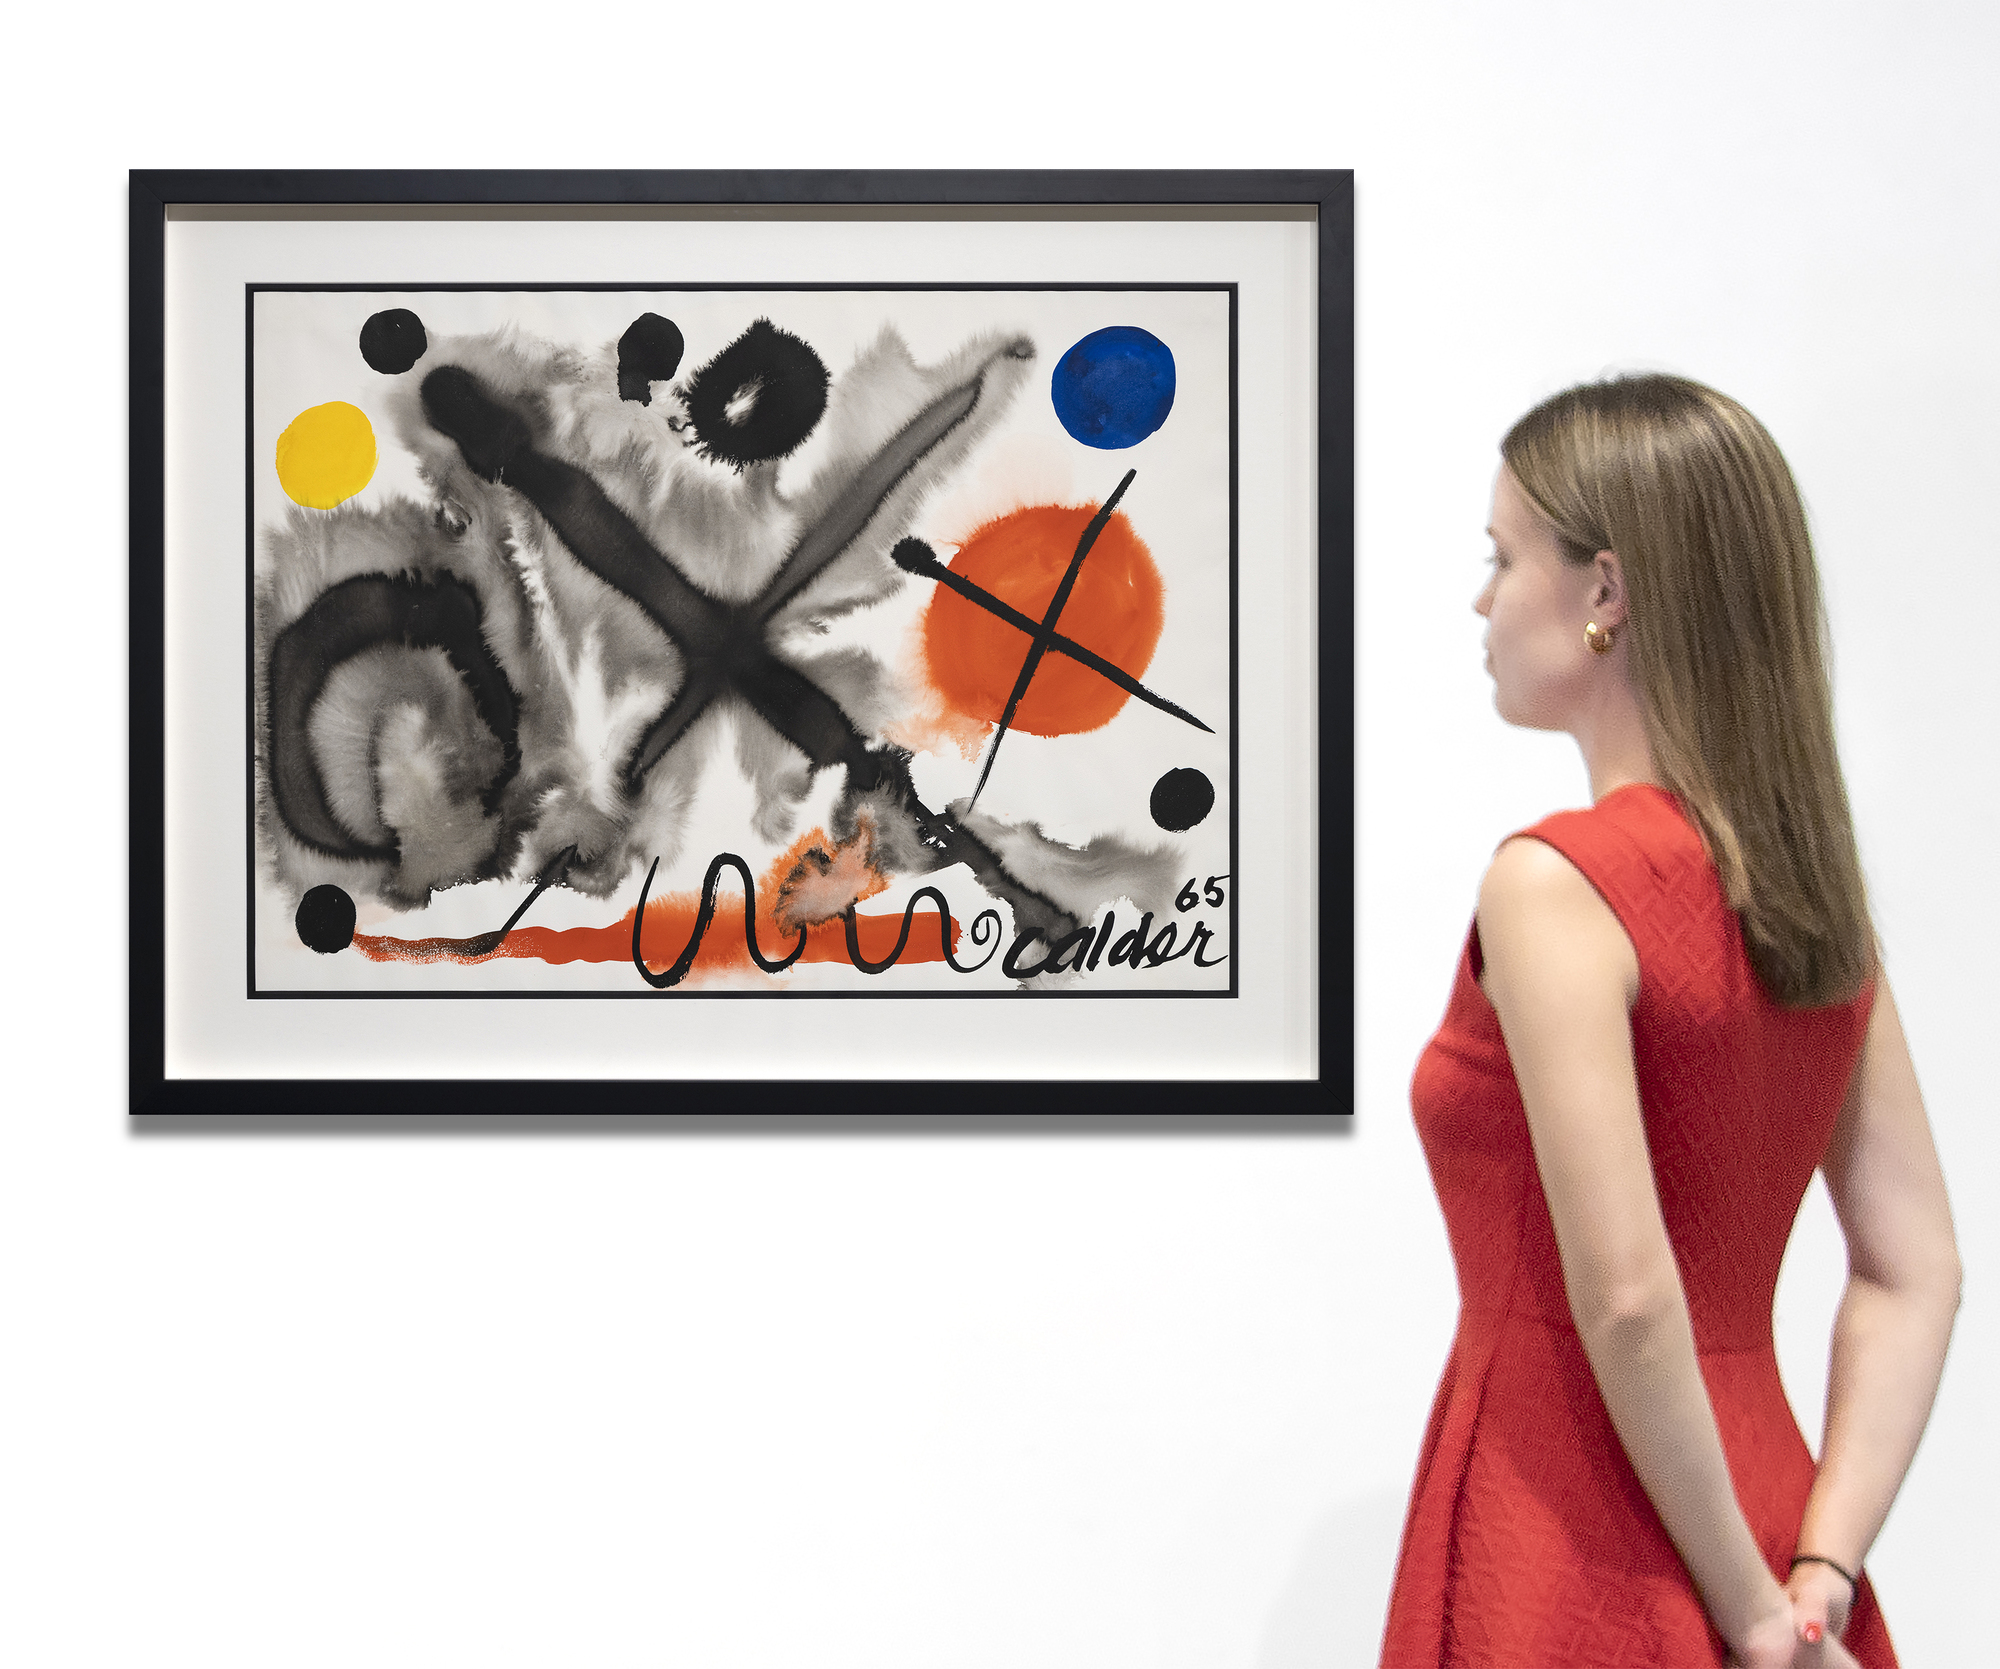 © 2023 Calder Foundation, New York / Artists Rights Society (ARS), New York&lt;br&gt;Two Crosses by Alexander Calder is a striking work on paper, blending transparent watercolor and gouache, showcasing his signature repertoire of shapes and symbols. At its heart lies a large, black &#039;X&#039; on a fluid, grayish wash, and nearby, a smaller, opaque black cross overlapping a semi-opaque red ball, and to its left, a roundish transparent wash patch hosts a black crescent shape. Several spheres in black provide accompaniment, and the artist&#039;s favored primary colors, and at the lower margin, his charming undulating line. Calder&#039;s sparing use of watercolor allows the paper&#039;s white to showcase the forms and symbols, creating a dynamic, impactful artwork where simplicity and the interplay of transparent and opaque elements captivate the viewer.